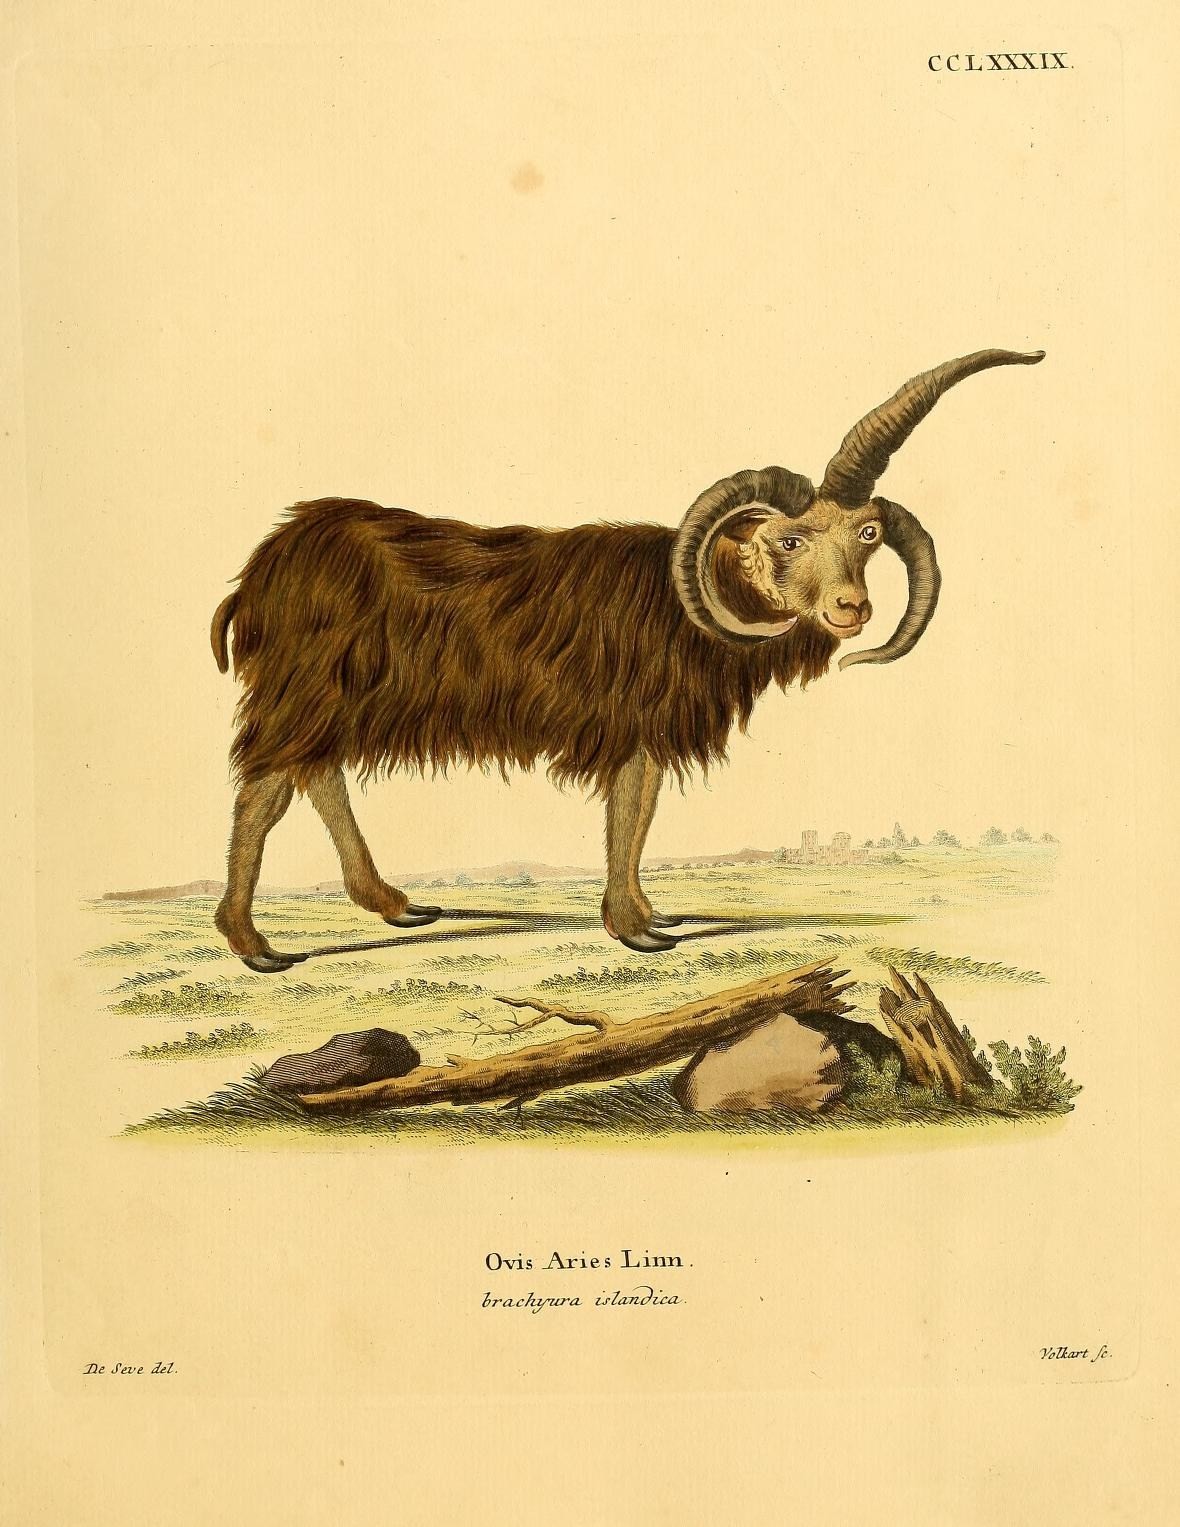 an illustration of a long horned animal standing next to another creature